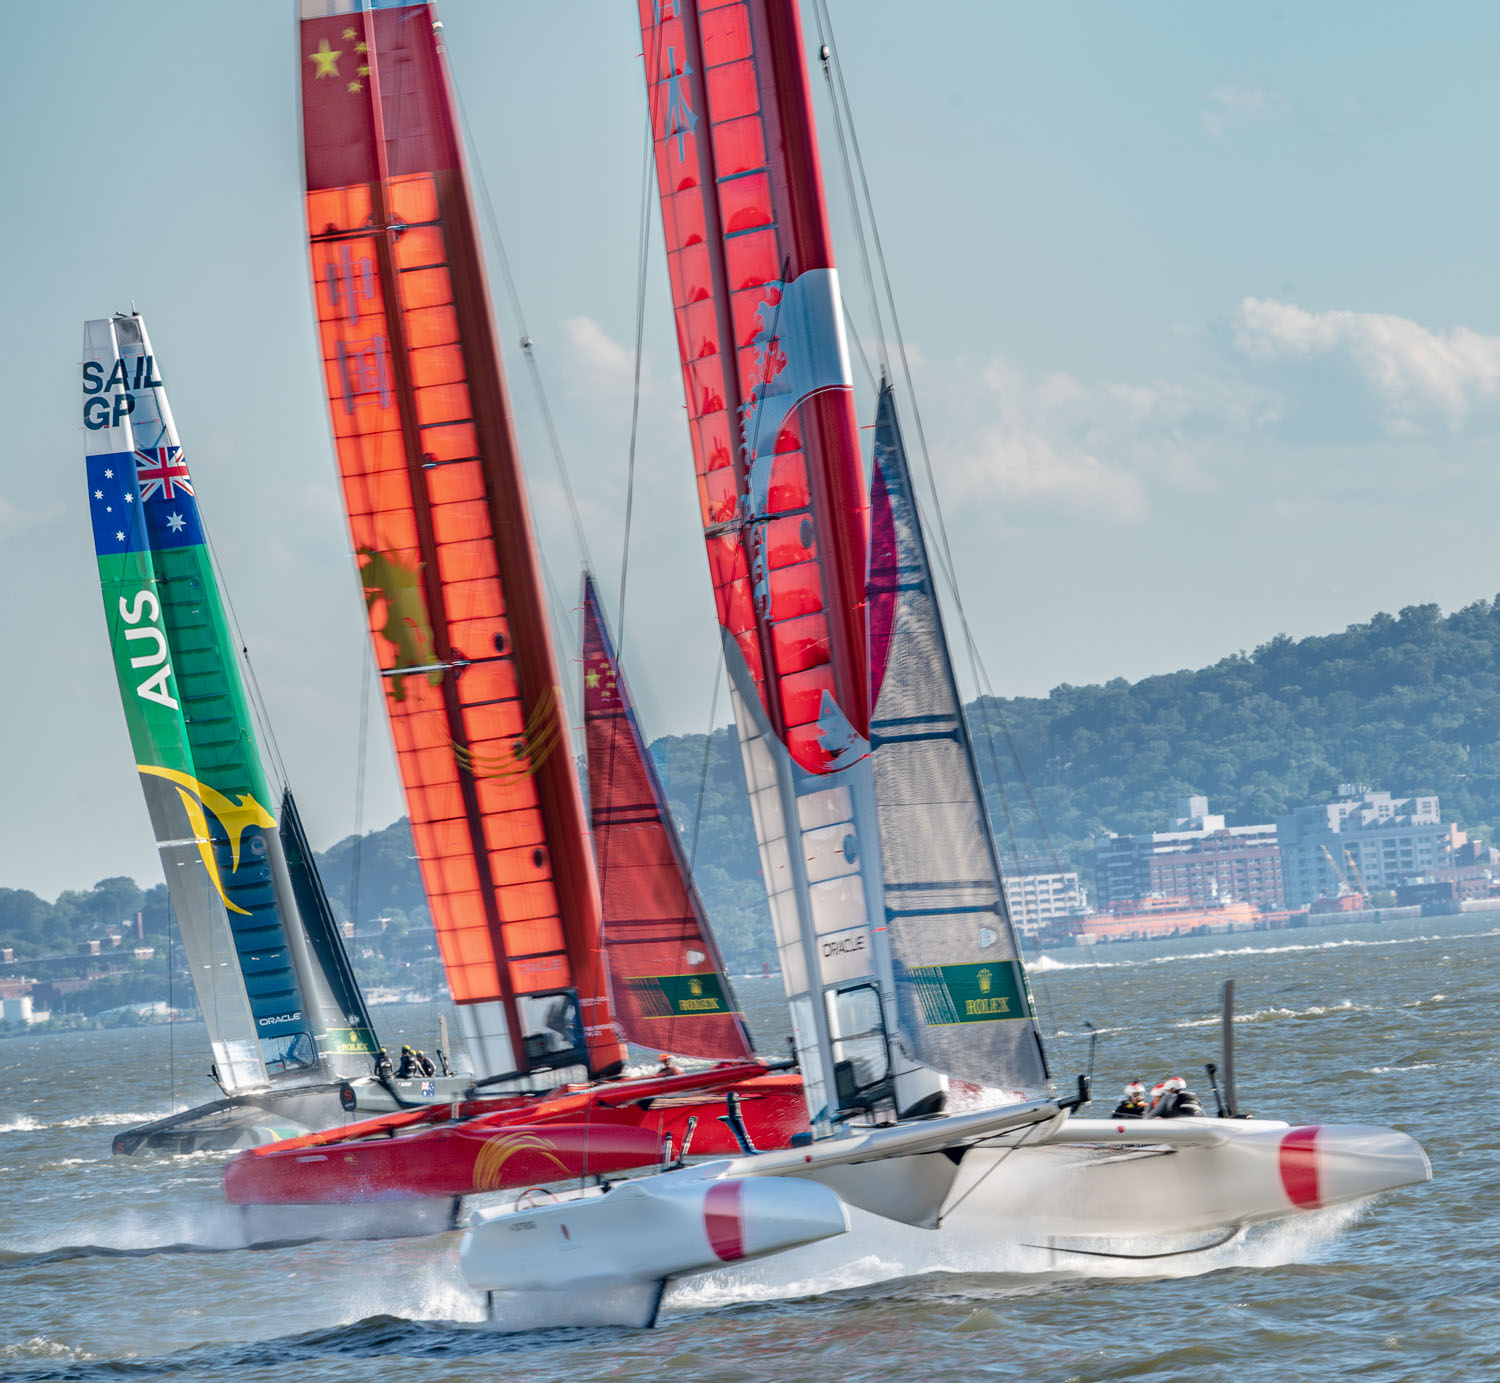 Battling for the lead in the Sail GP race on the Hudson.,  the cats are all riding on hydrofoils..jpg